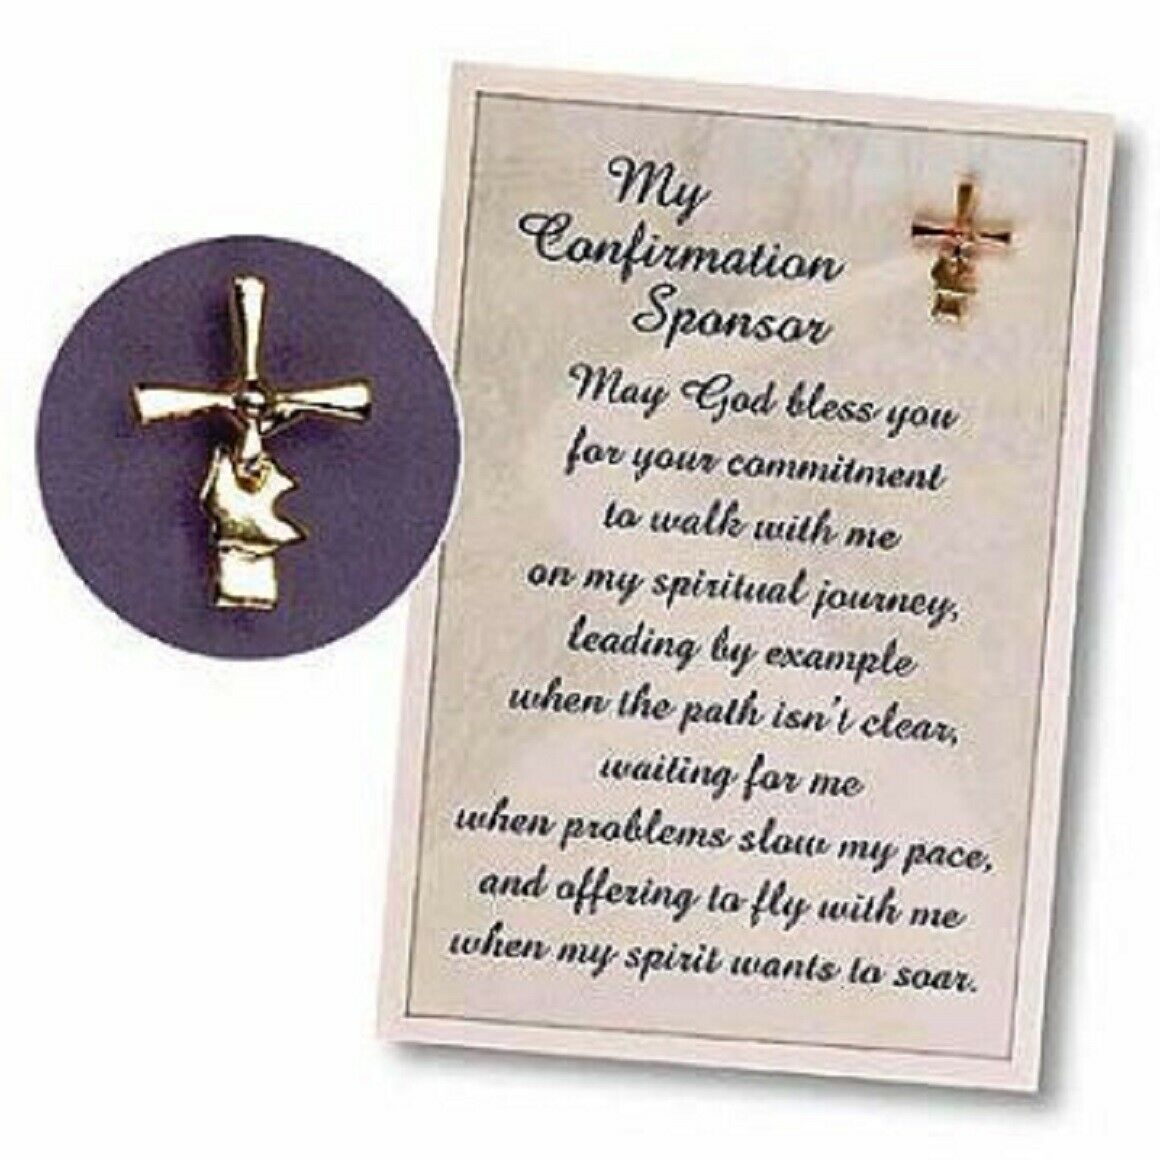 Confirmation Sponsor Appreciation Thank You Gift Carded Cross/Dove Lapel Pin